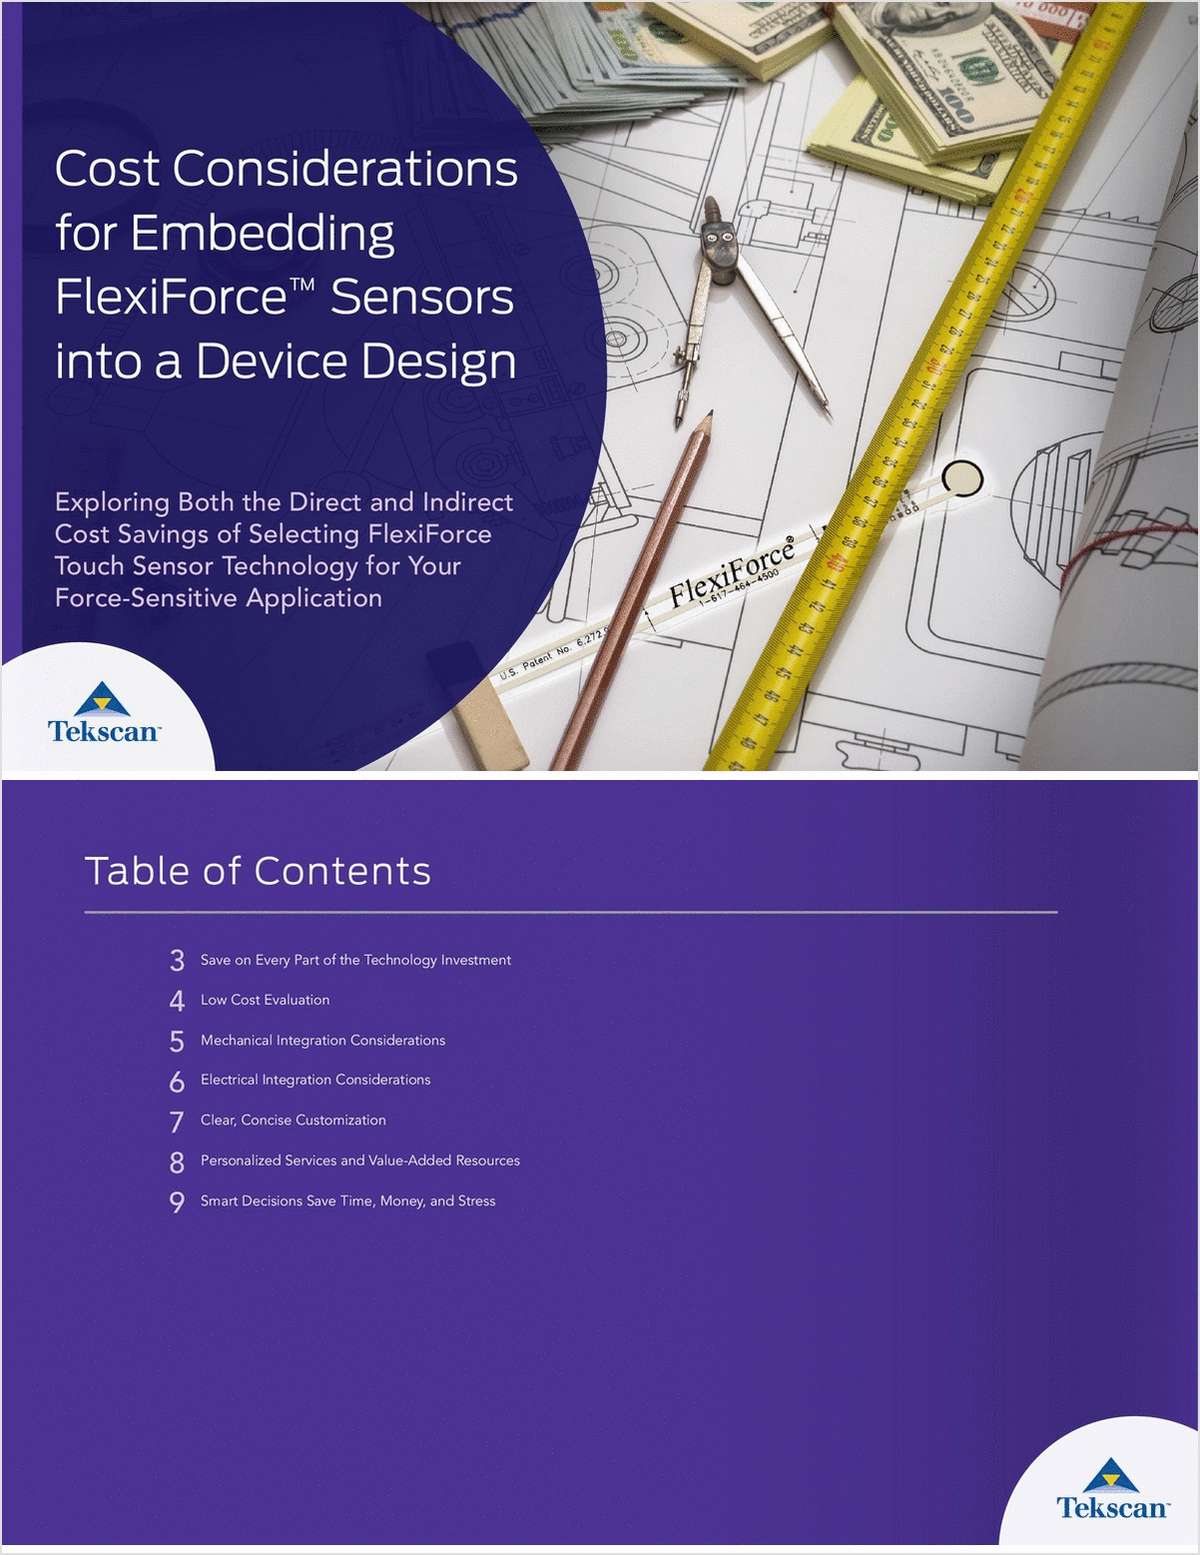 Cost Considerations to Help Save on the Entire Embedded Force Sensor Investment